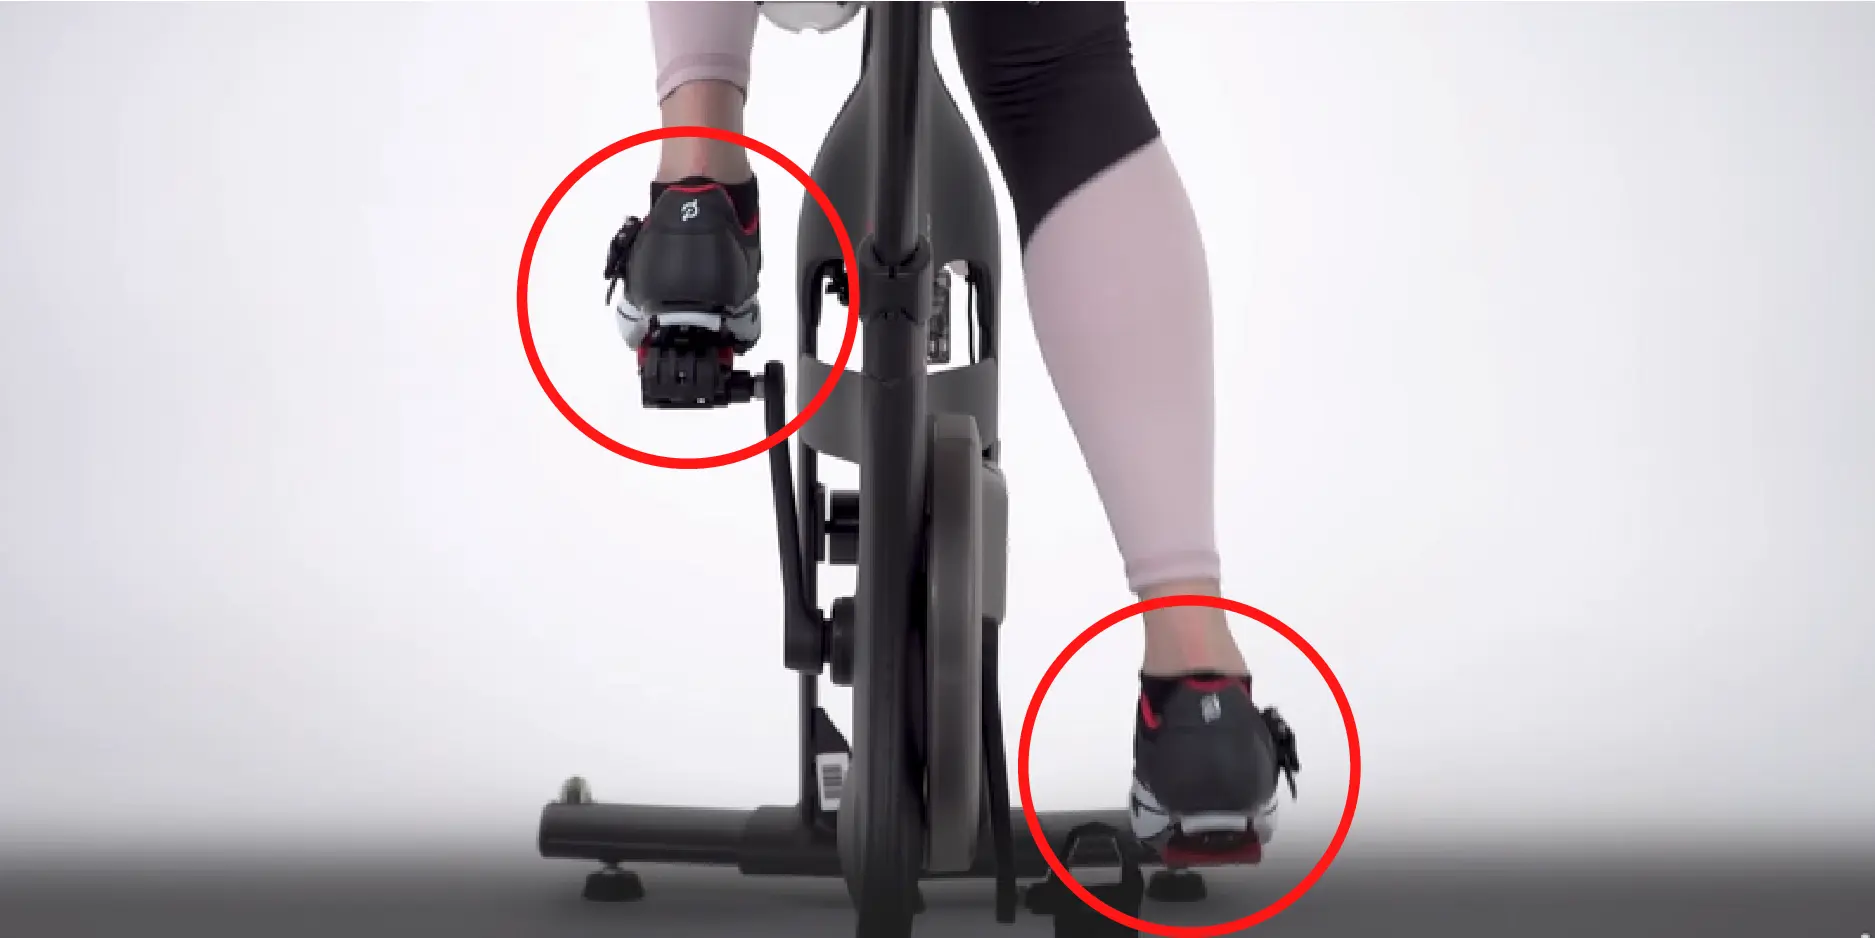 Clipping Procedure For Shoes And Peloton Bike